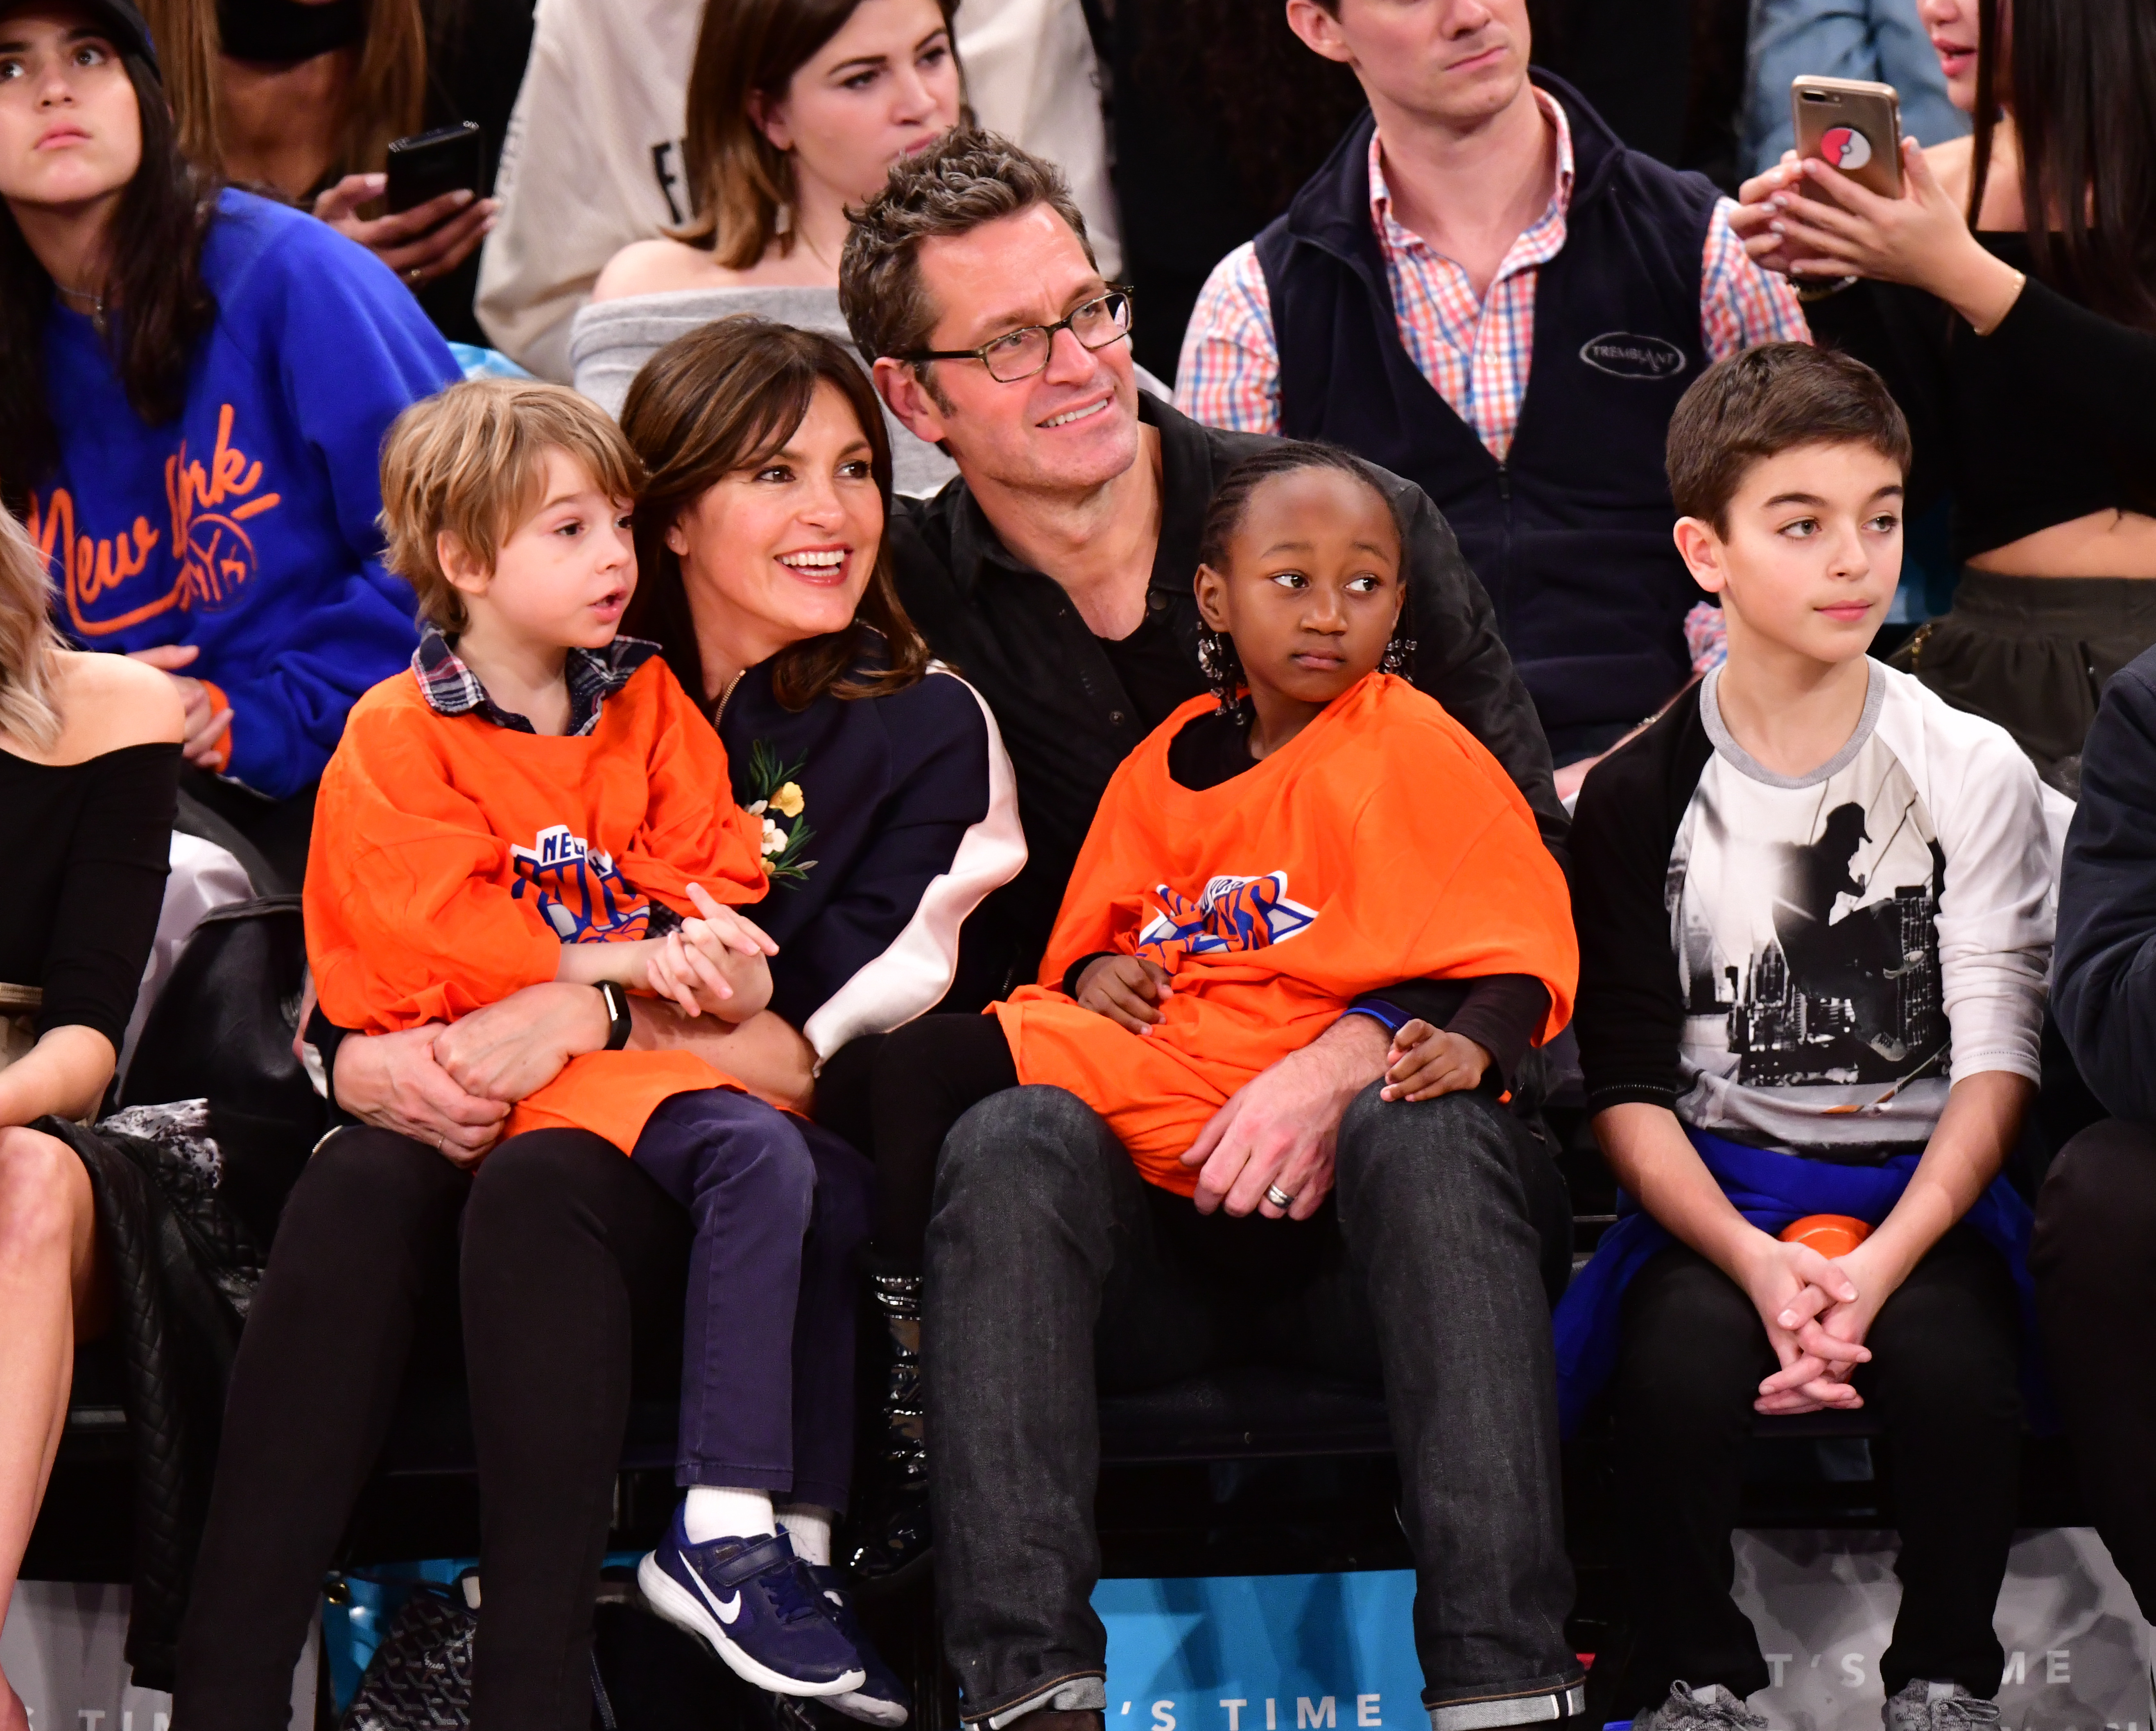 Mariska Hargitay and Peter Hermann had a great time with their children Amaya, Andrew, and August at the Madison Square Garden during the New York Knicks vs Boston Celtics game on February 24, 2018 | Source: Getty Images